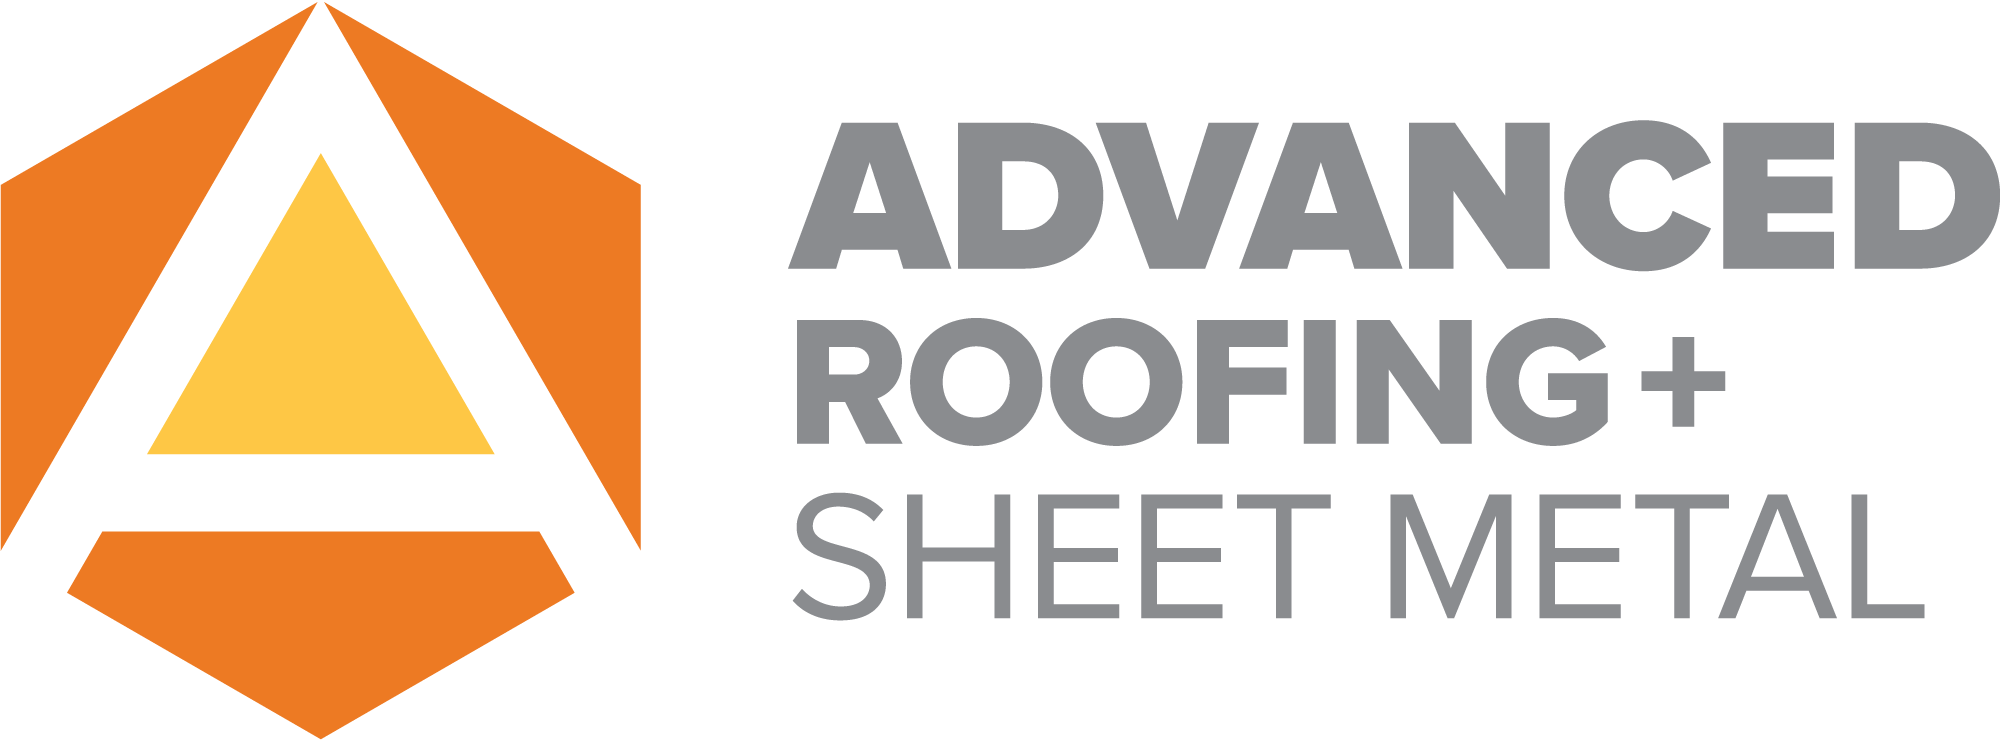 Advanced Roofing and Sheetmetal